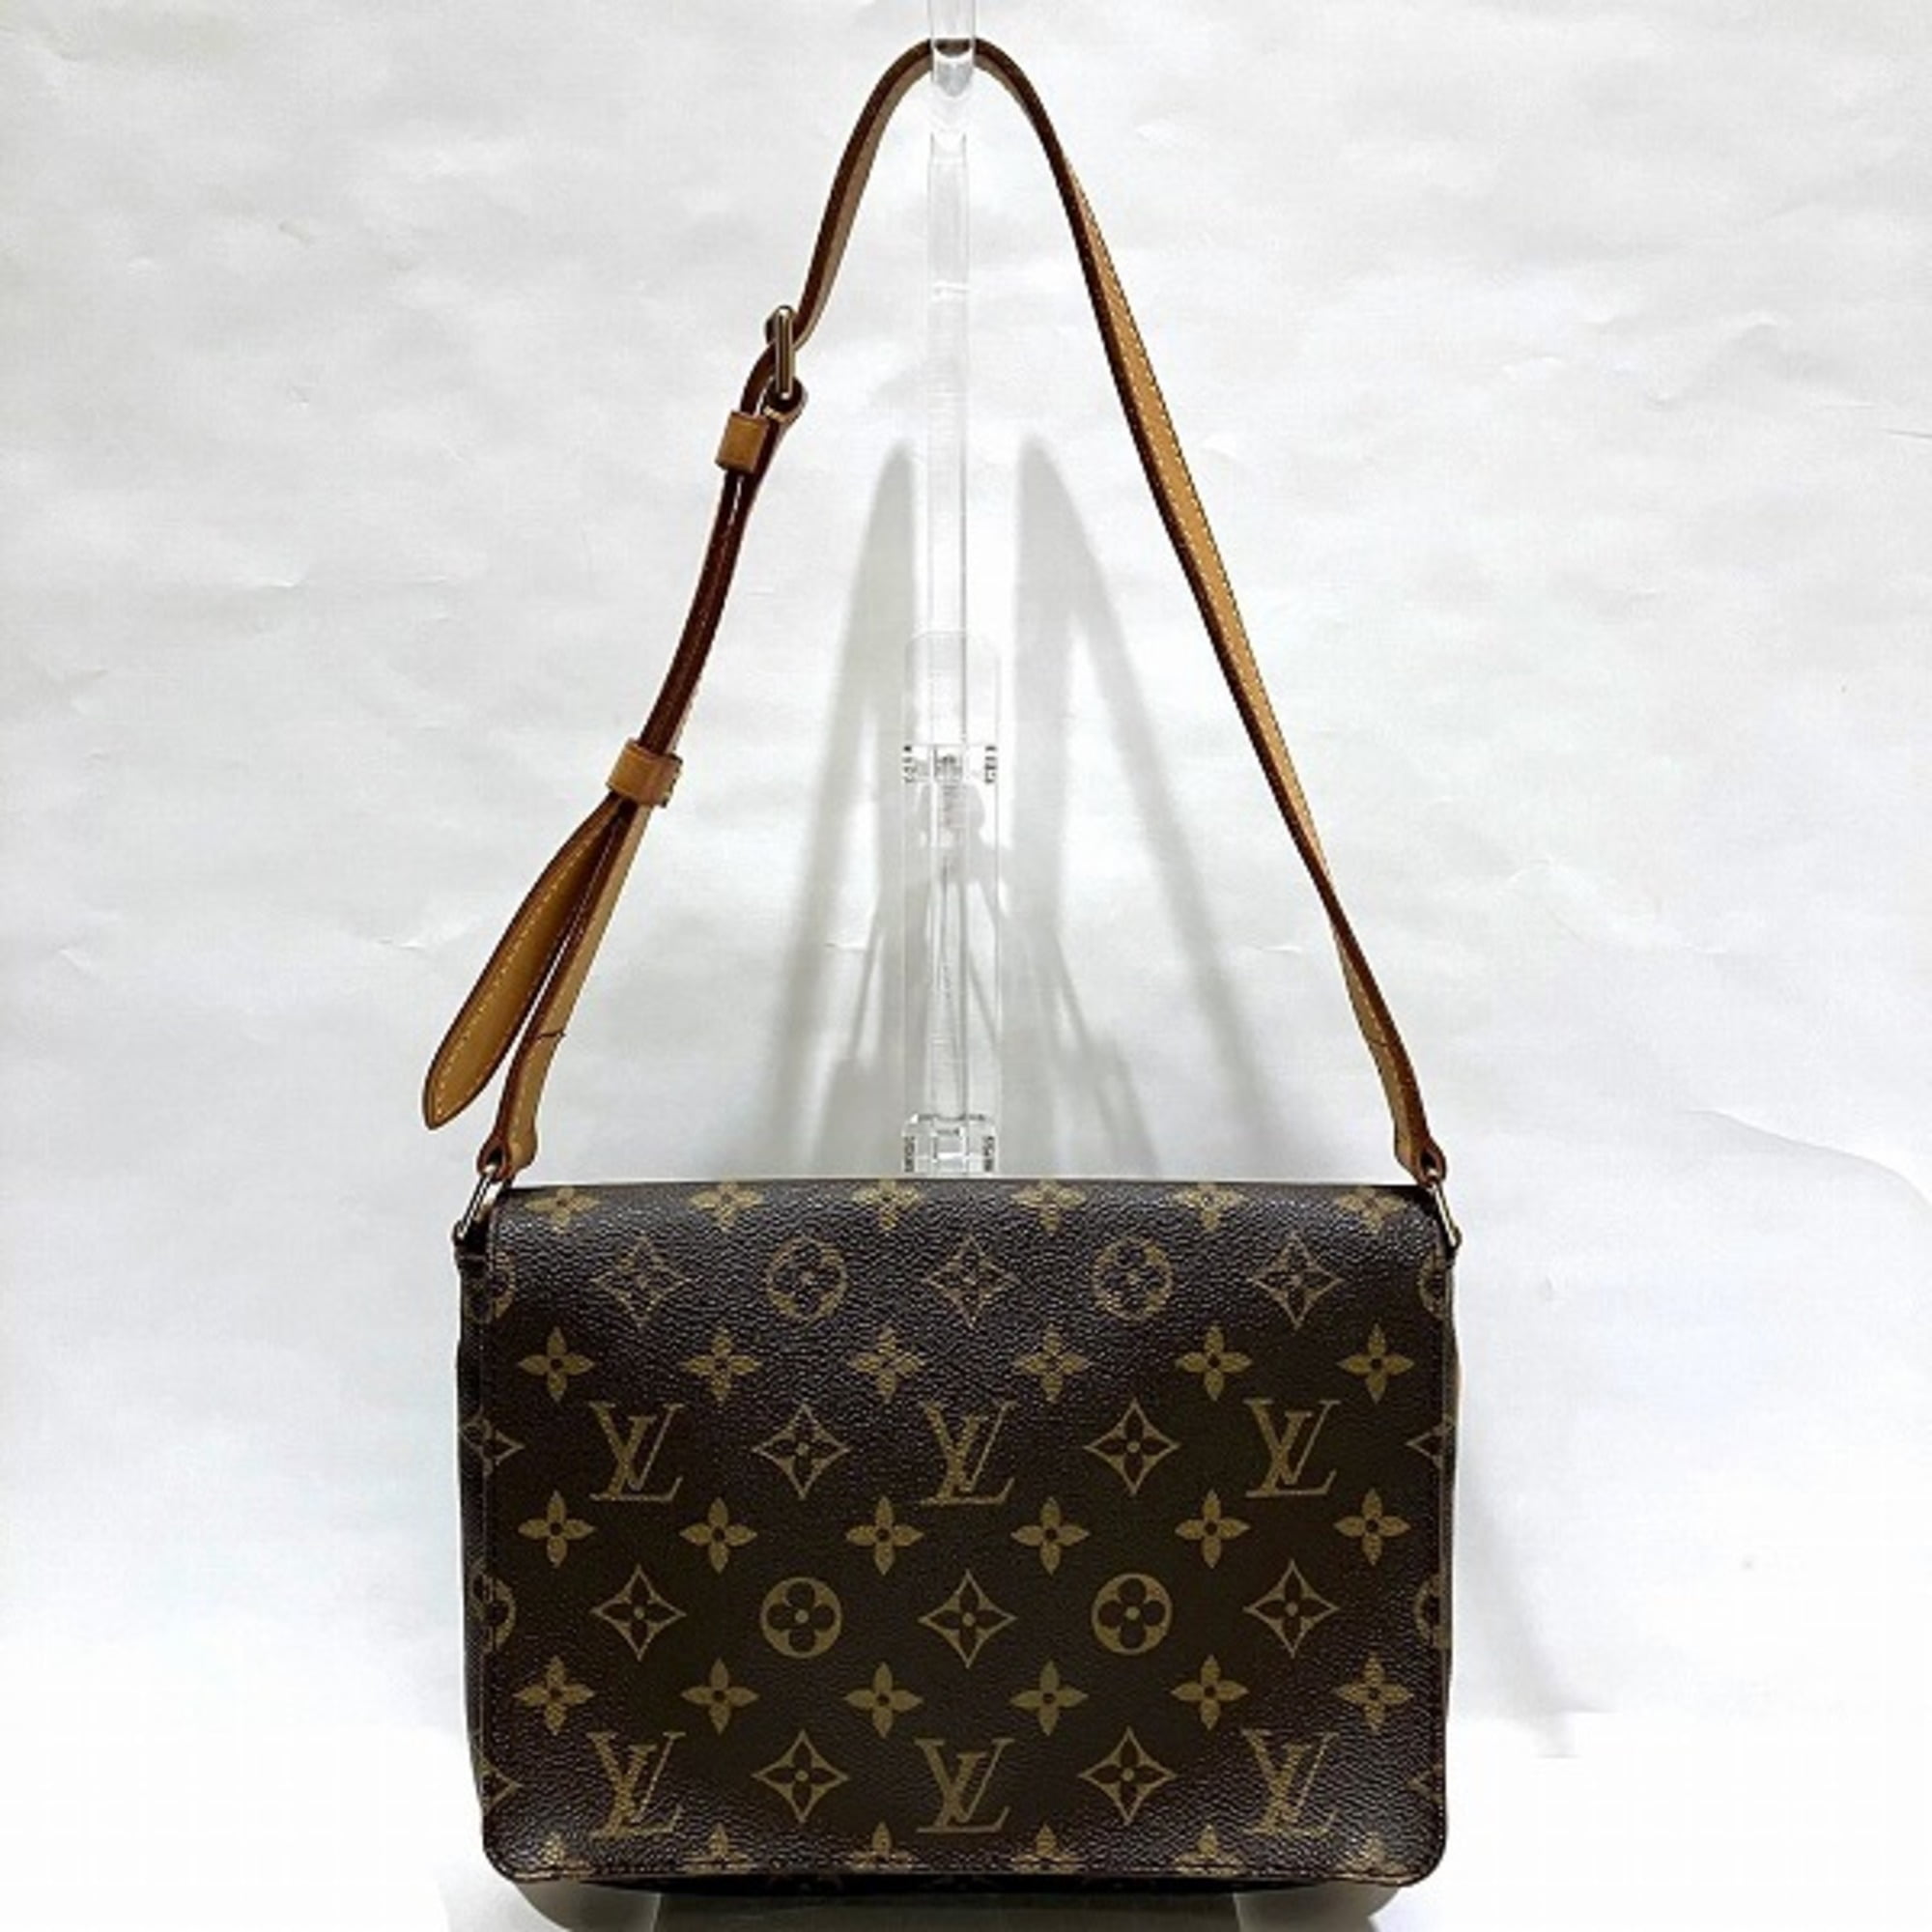 Authentic LV purse. In good condition. Barely used. | Lv purse, Purses,  Vuitton